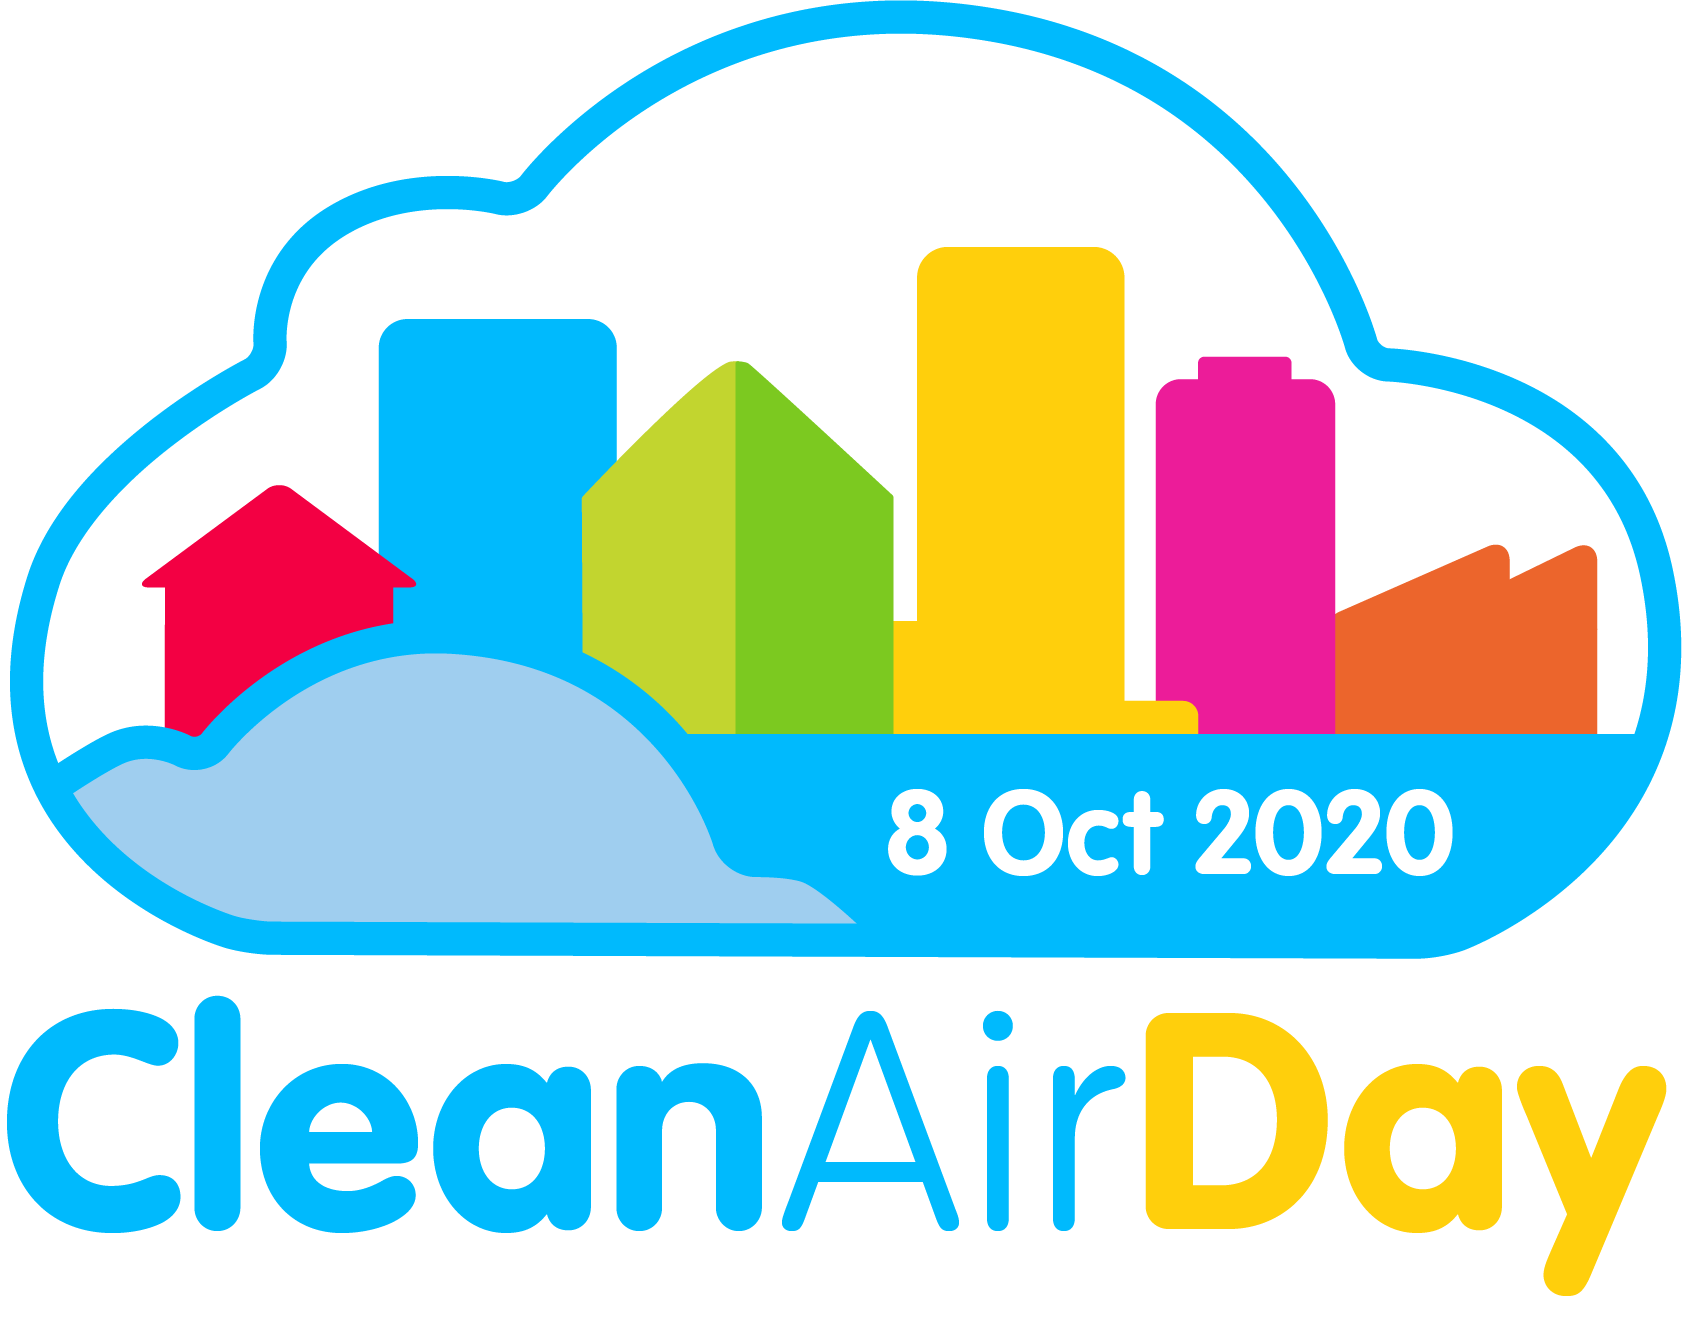 Kingston Council highlights local projects ahead of  UK Clean Air Day